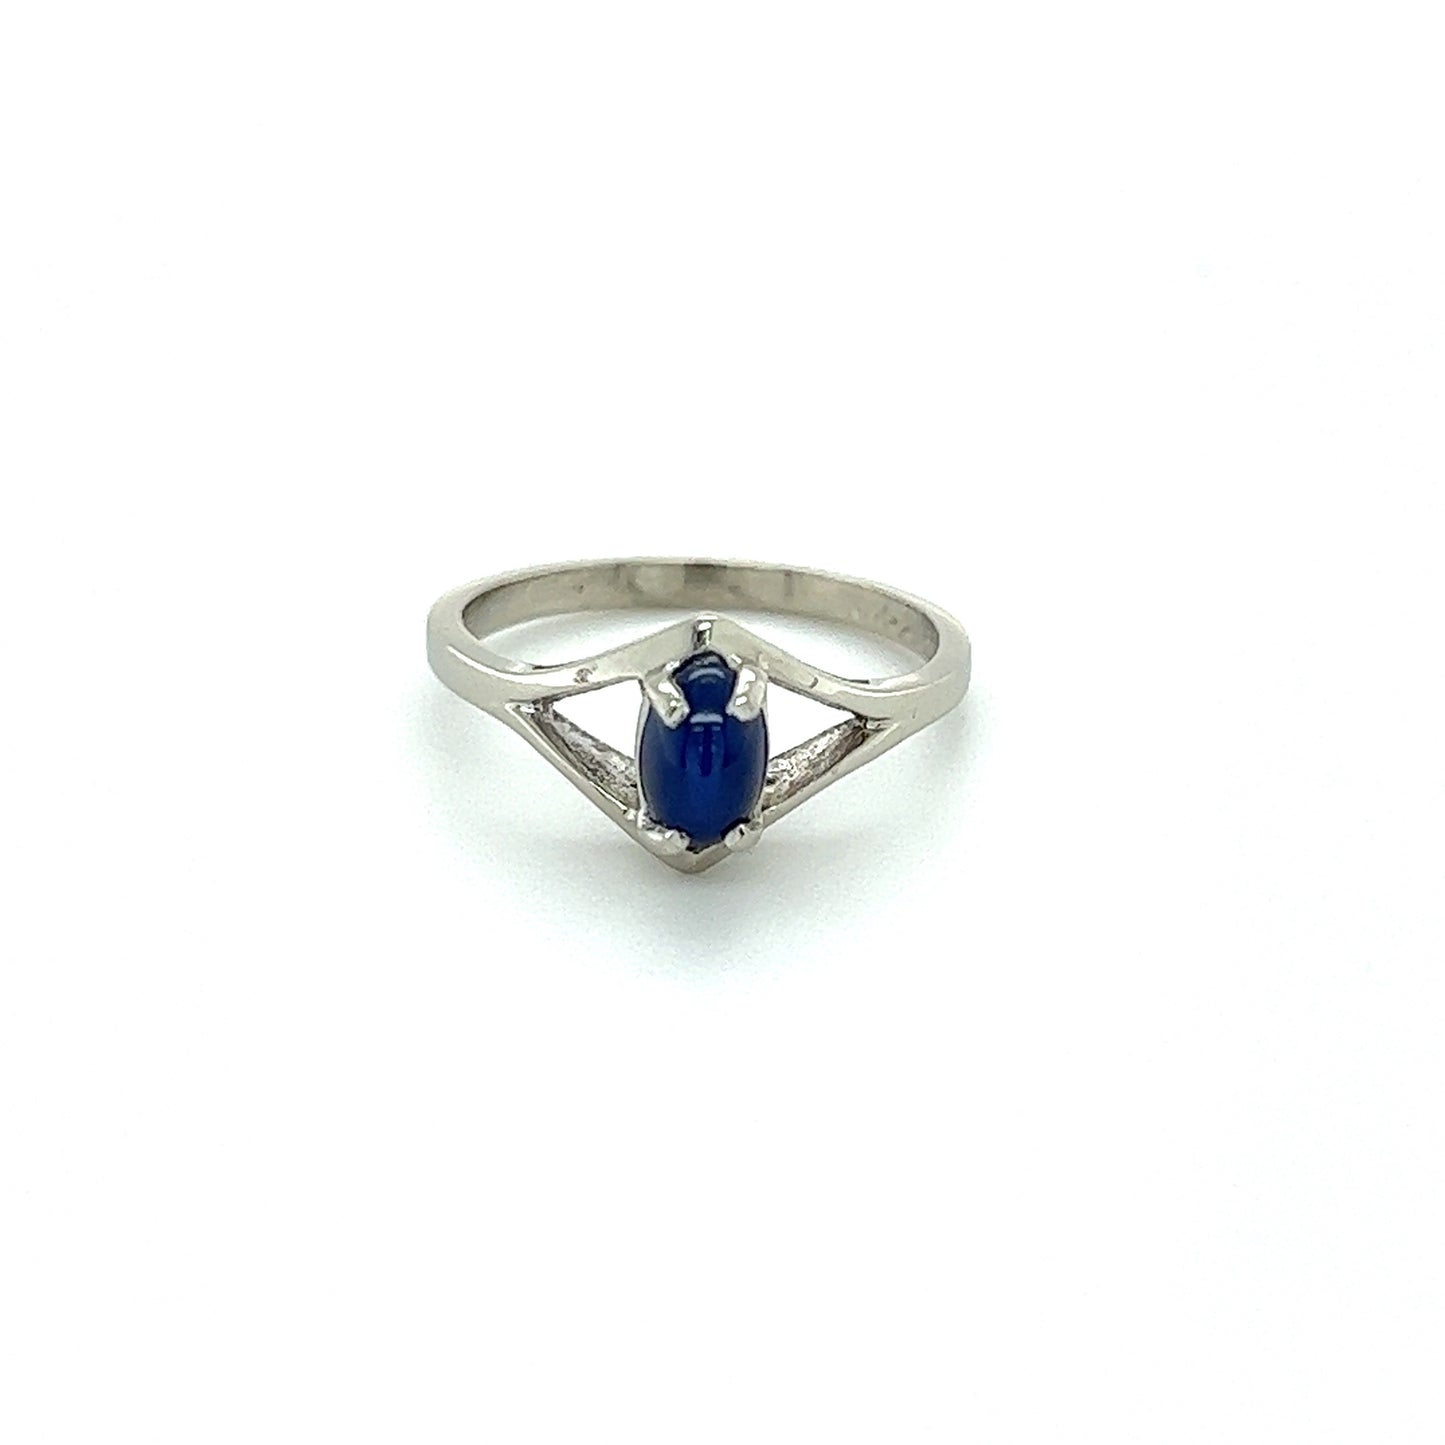 Lady's 10K White Gold & Sapphire Ring 2.0g